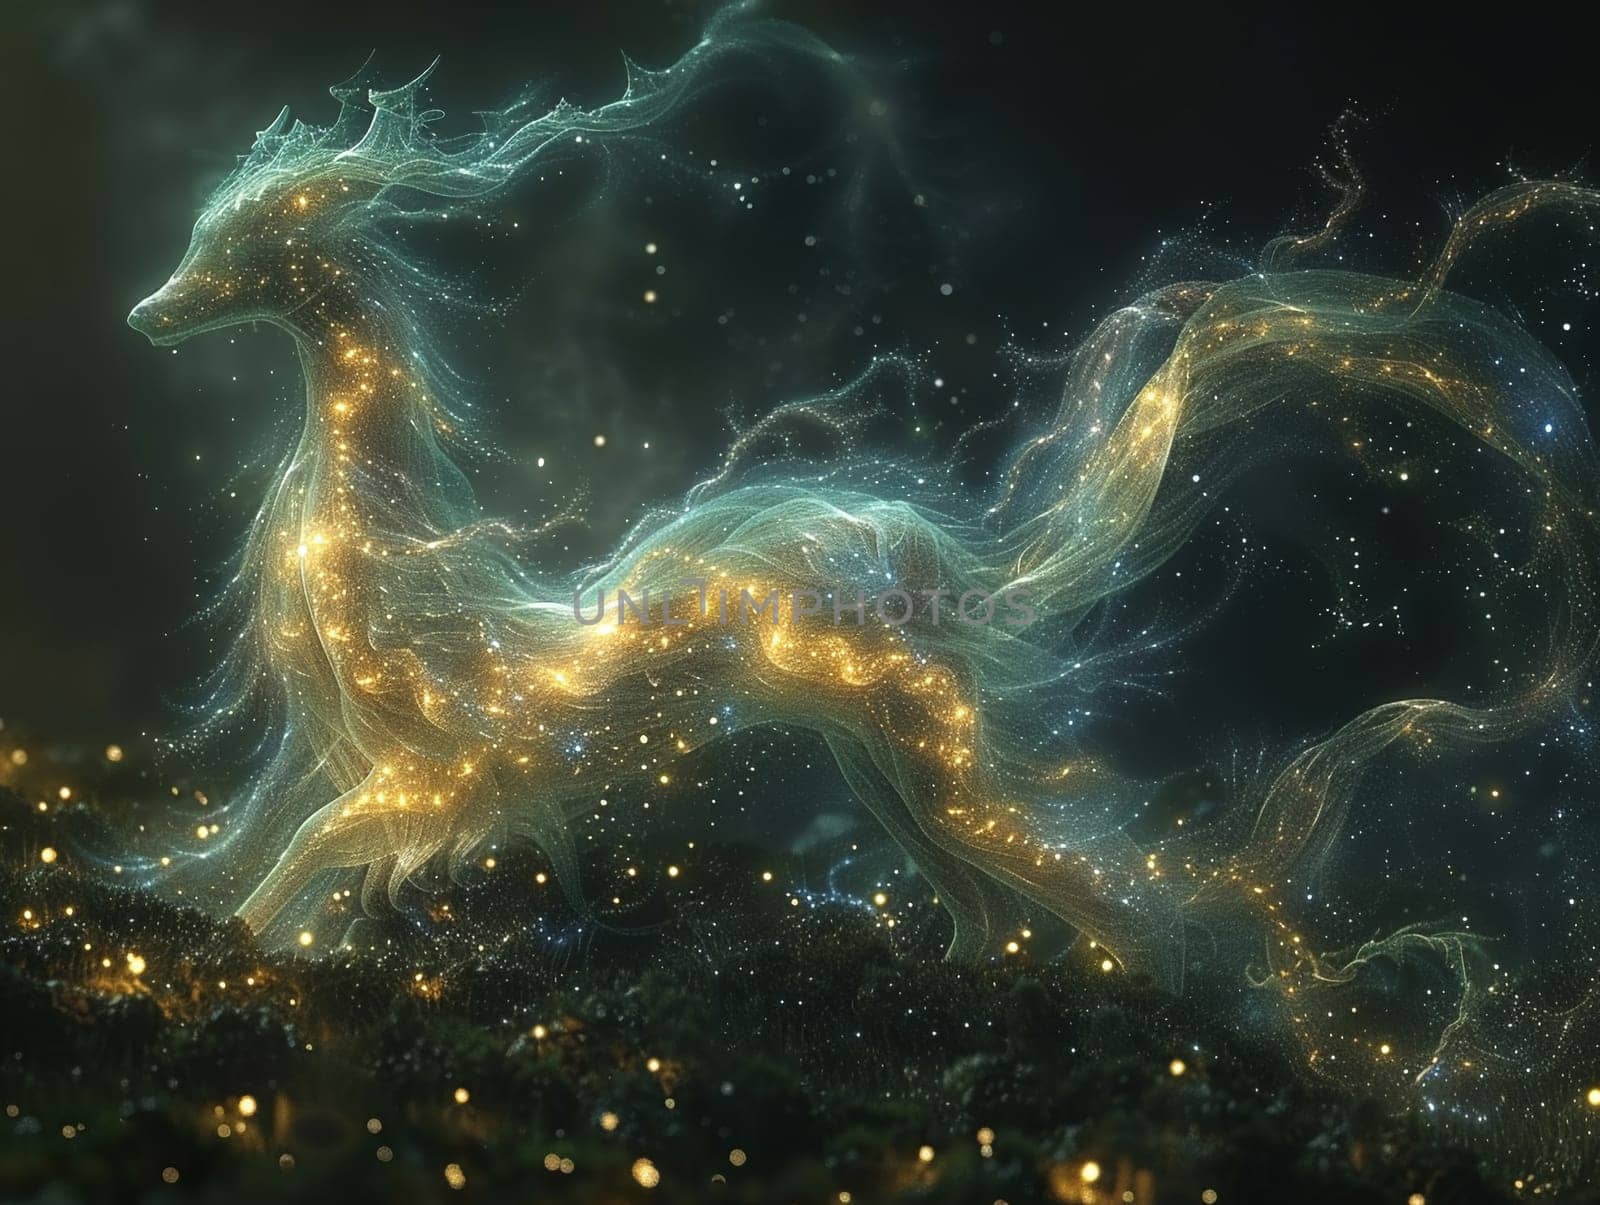 Star constellation forming a mythical creature, digitally created image with celestial elegance and mystique.